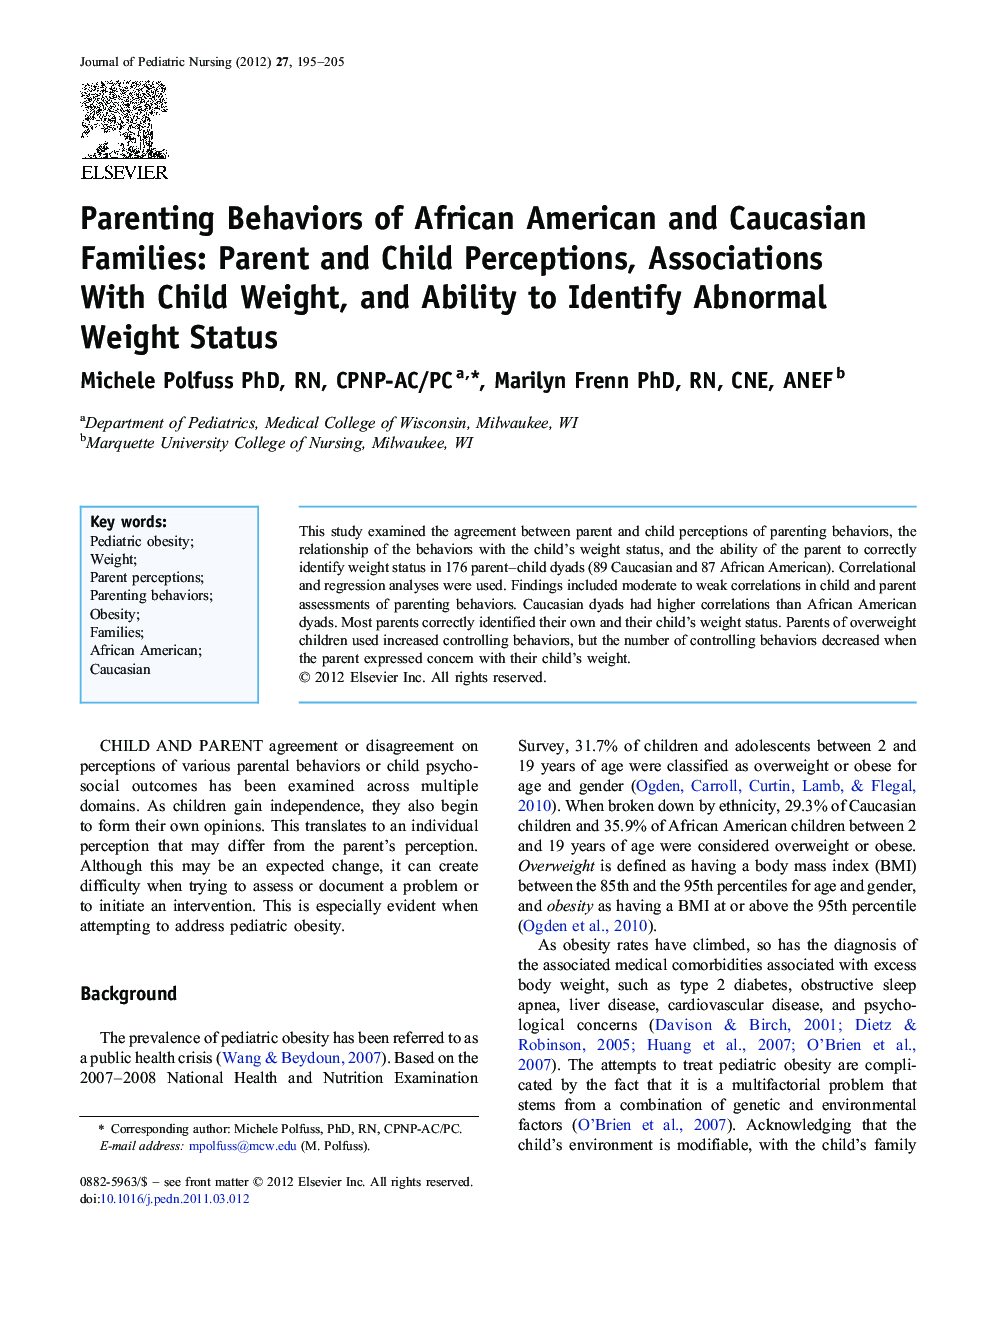 Parenting Behaviors of African American and Caucasian Families: Parent and Child Perceptions, Associations With Child Weight, and Ability to Identify Abnormal Weight Status